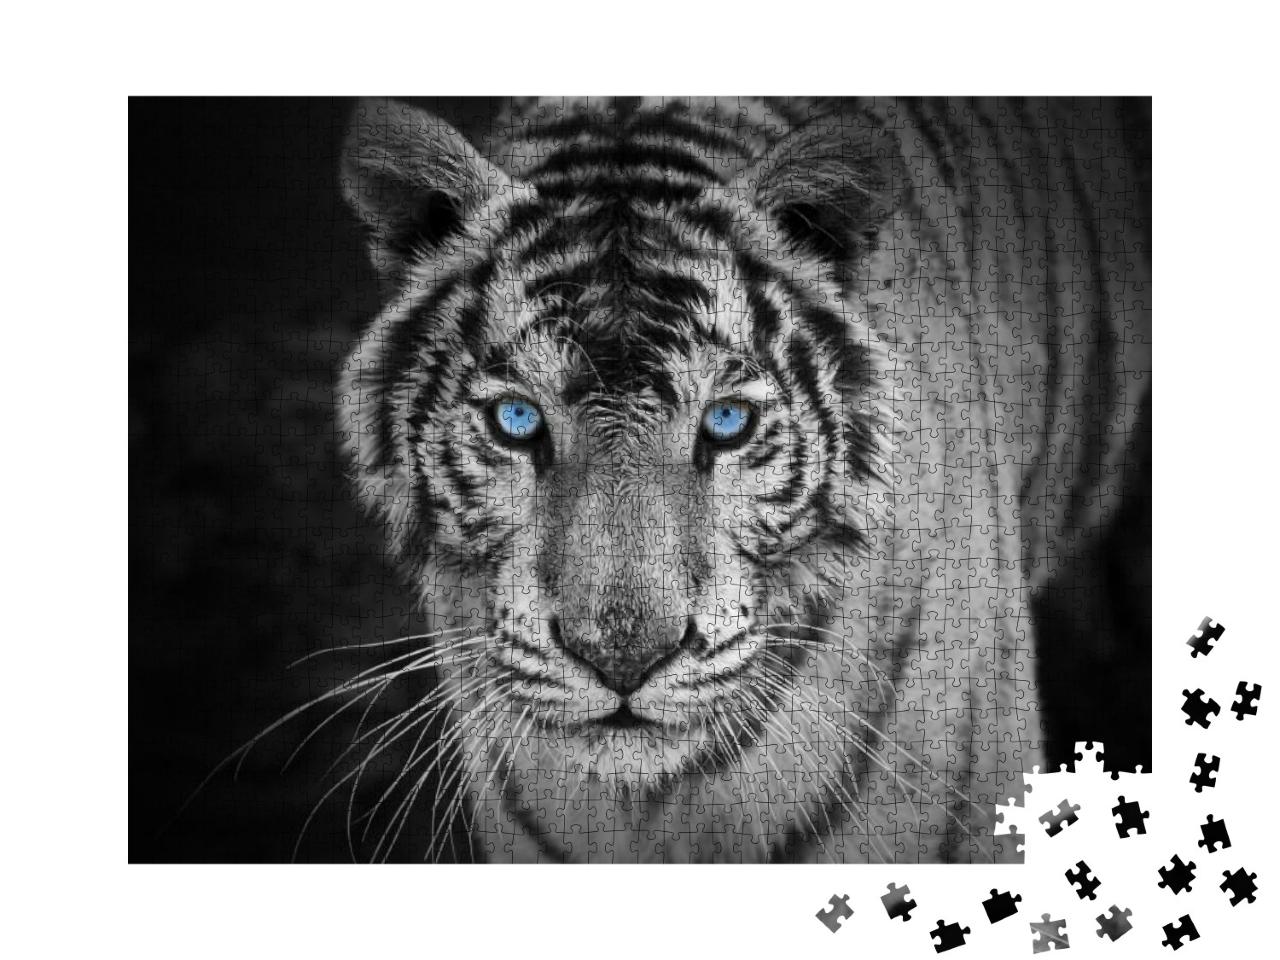 White Tiger... Jigsaw Puzzle with 1000 pieces